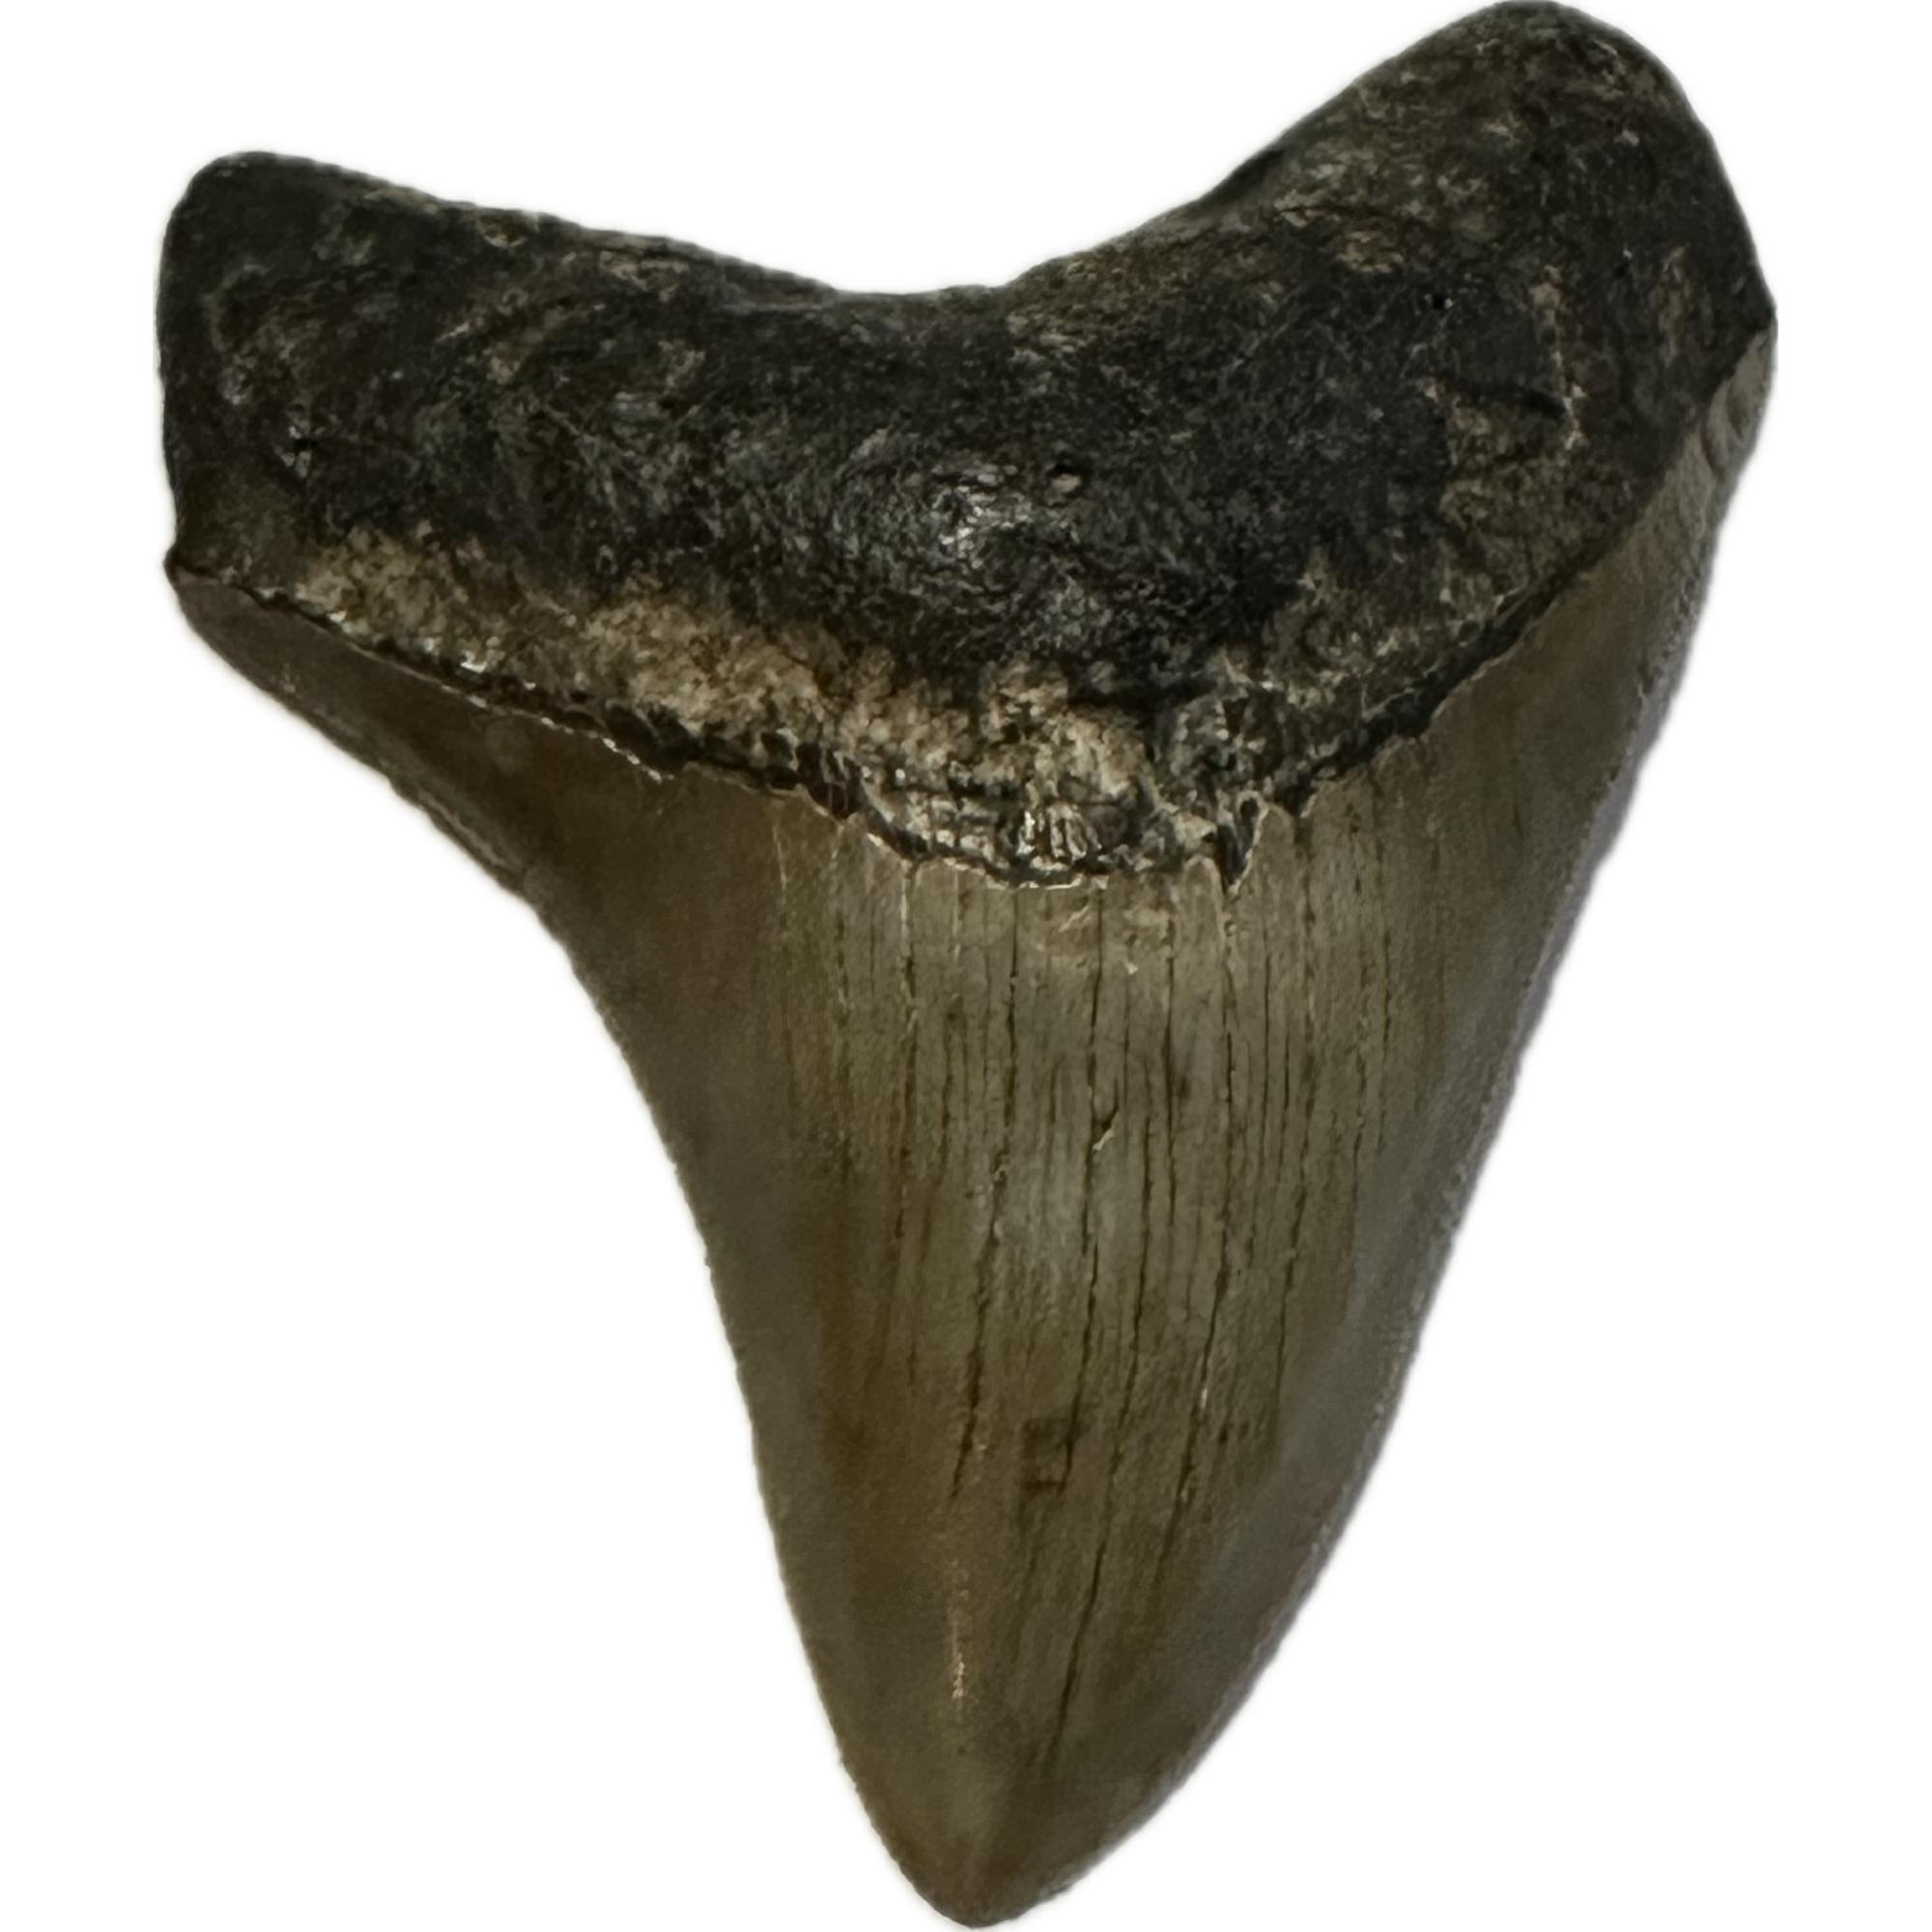 A beautiful fossil megalodon tooth with a dark grayish brown color with wonderful serrations